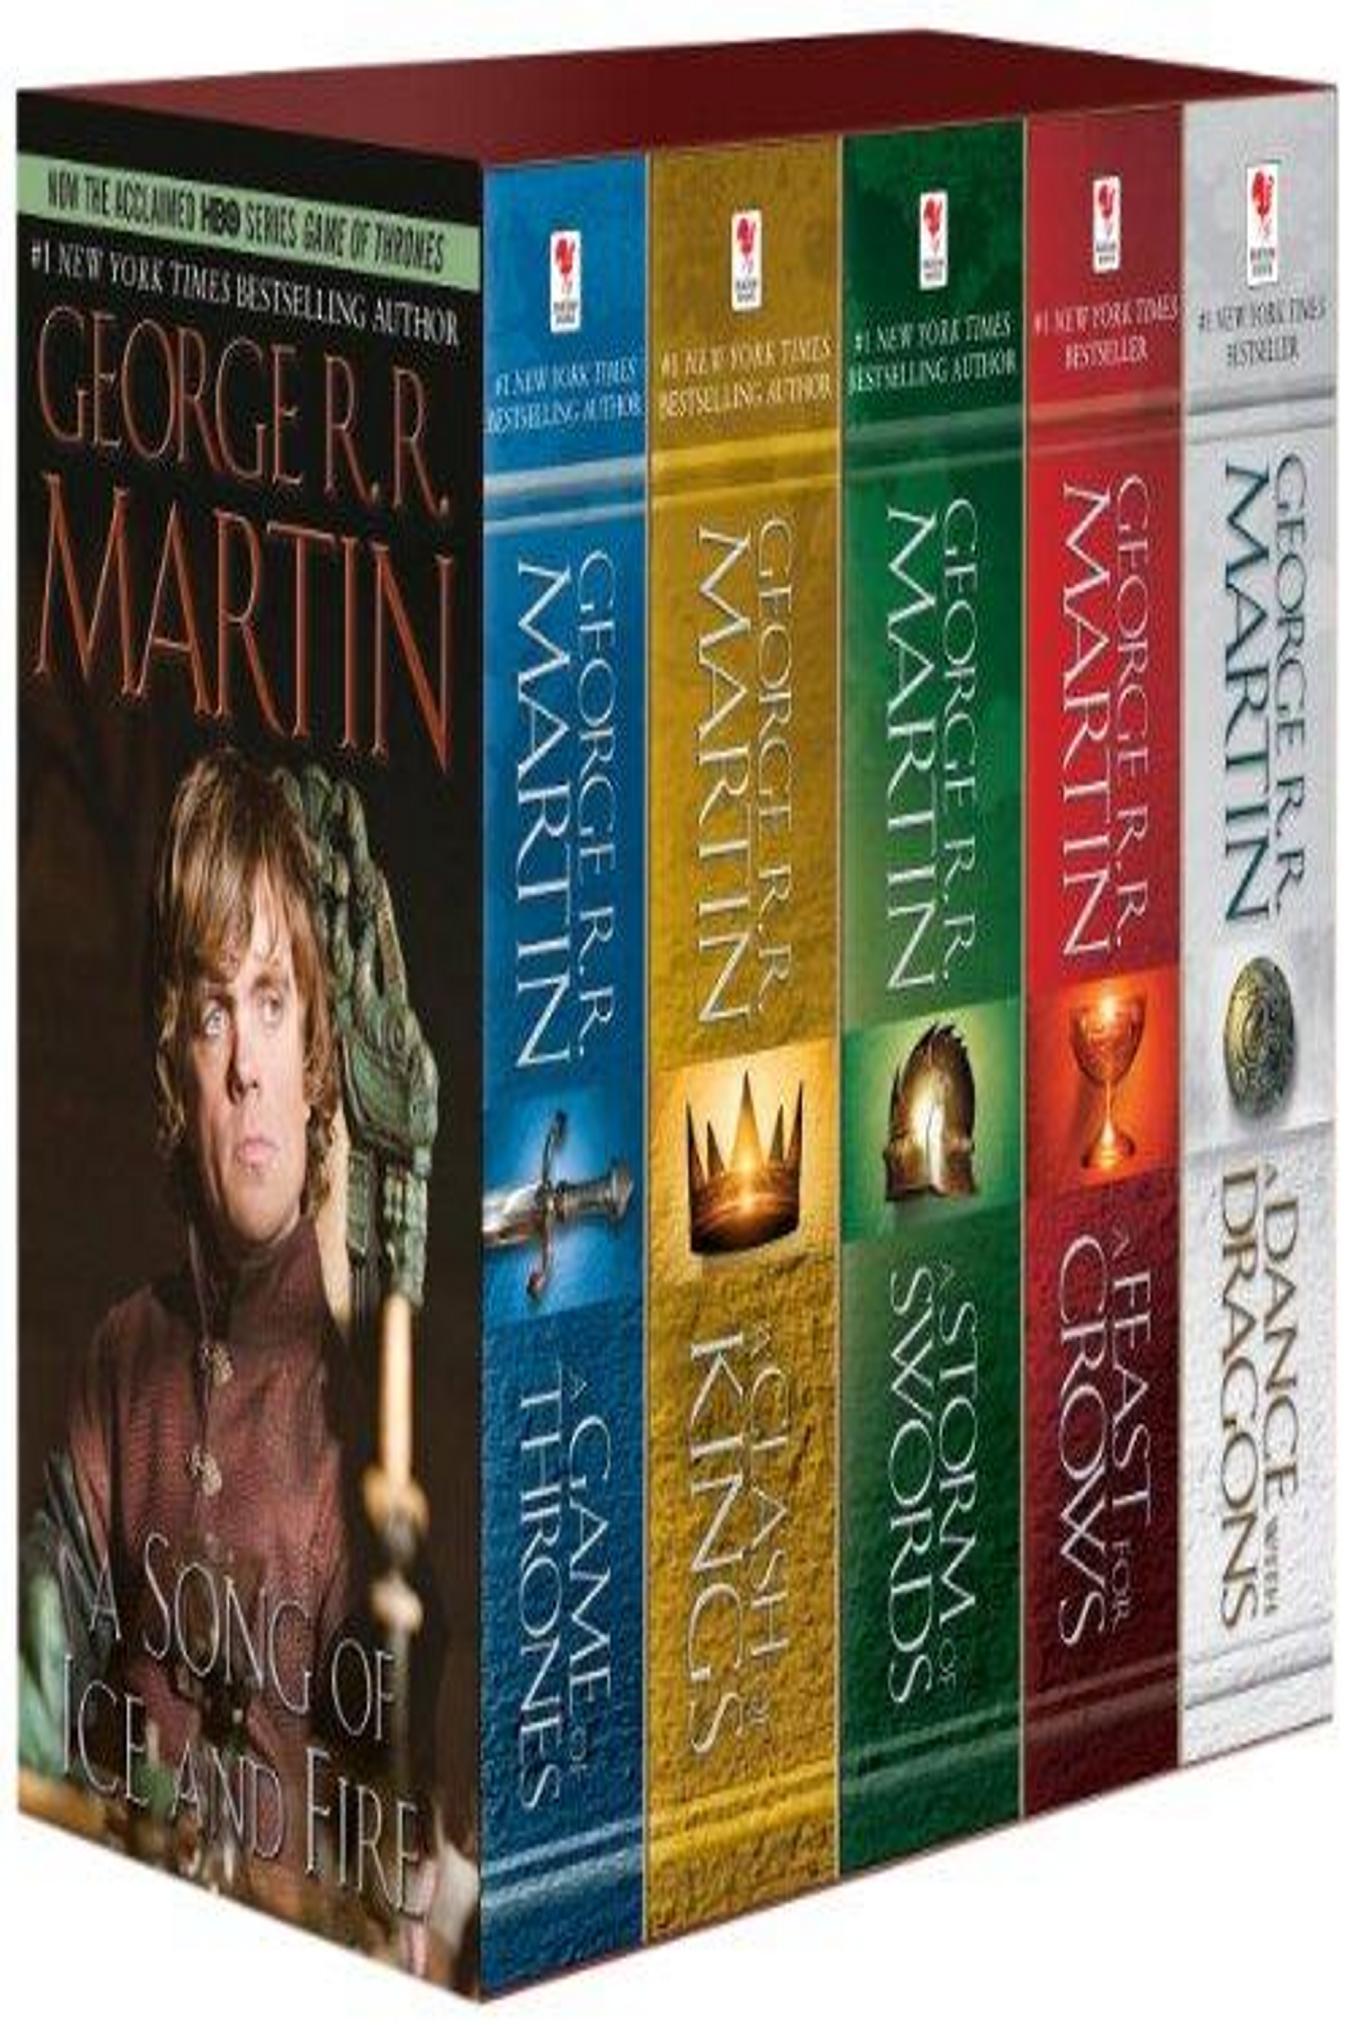 GAME OF THRONES / SONGS OF ICE AND FIRE 5 BOOKS  BOXED SET - TV Tie-In